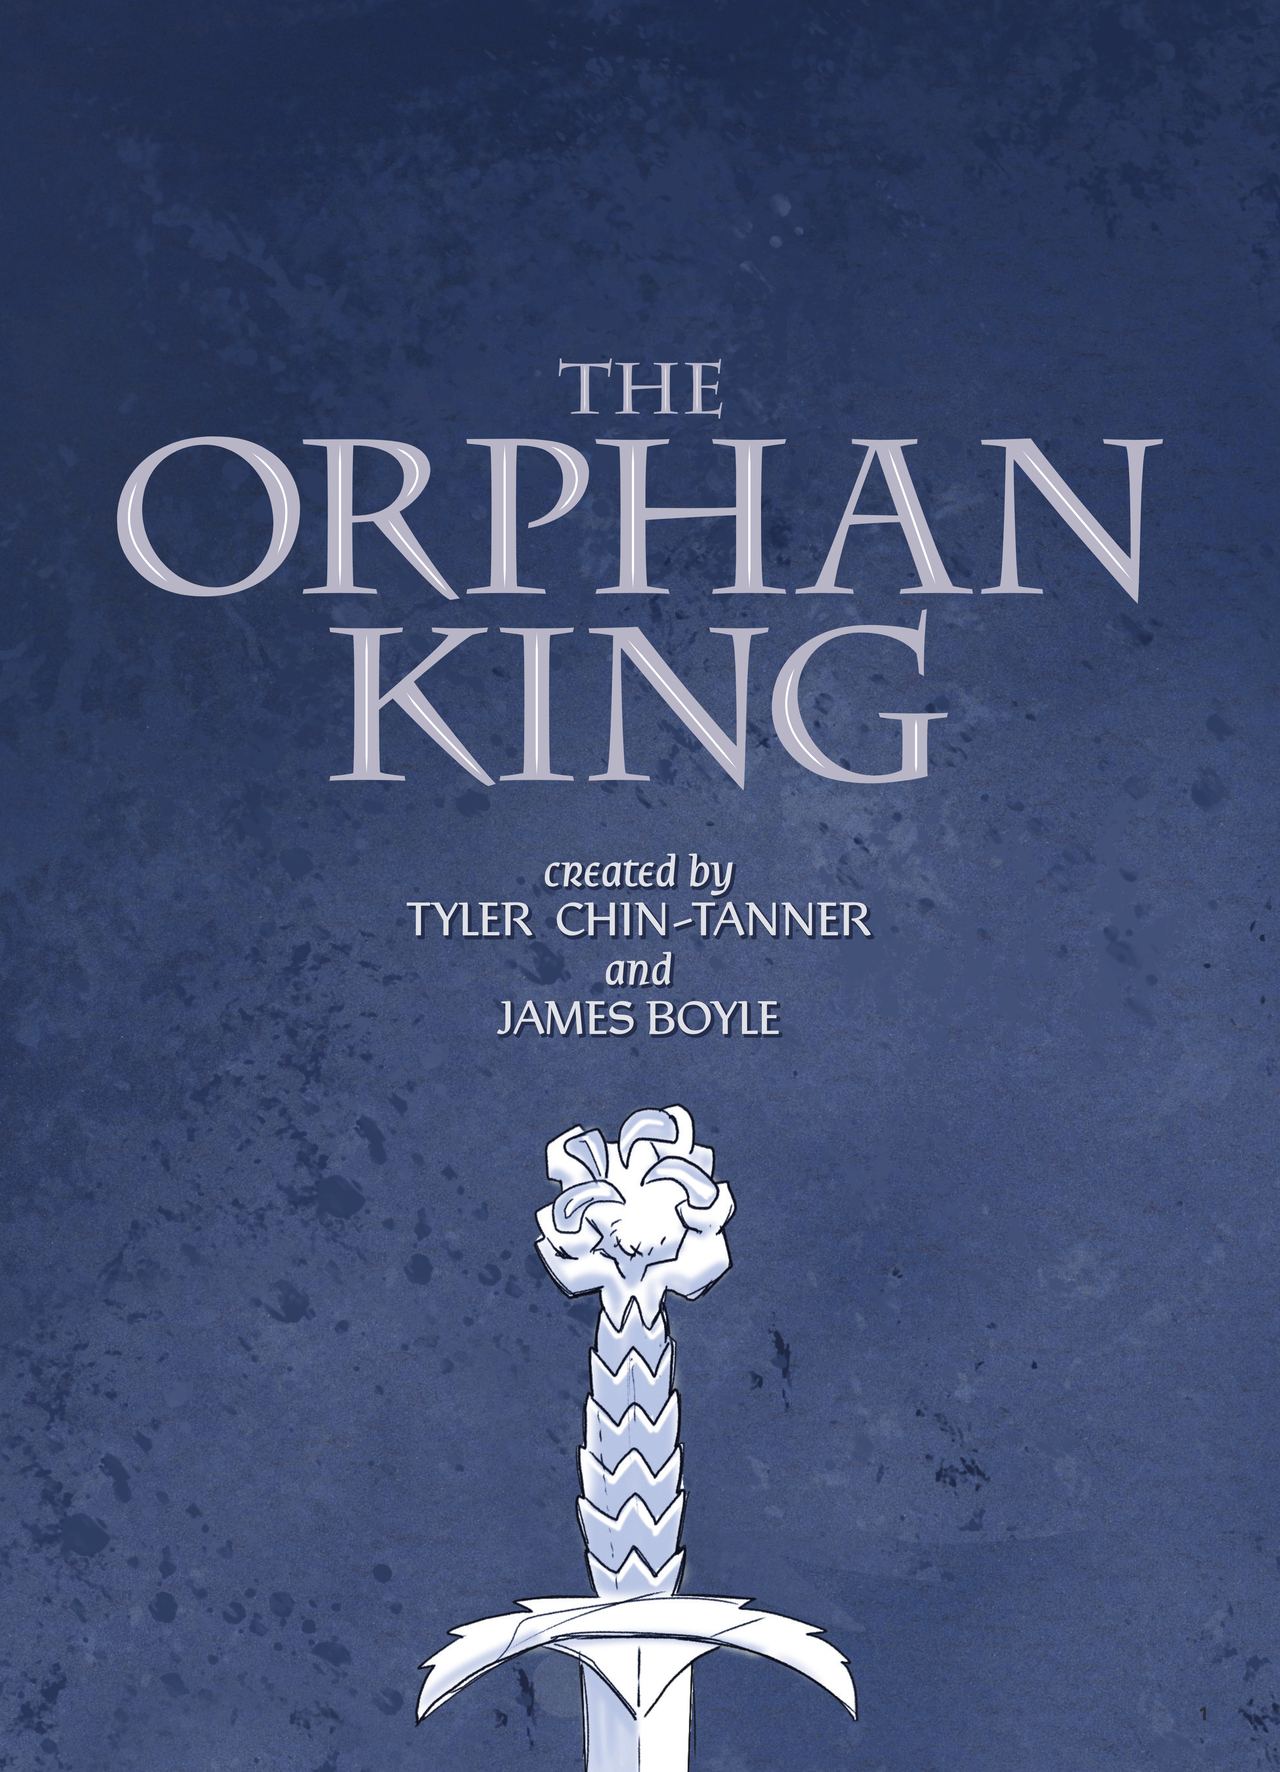 Read online The Orphan King comic -  Issue # TPB - 2